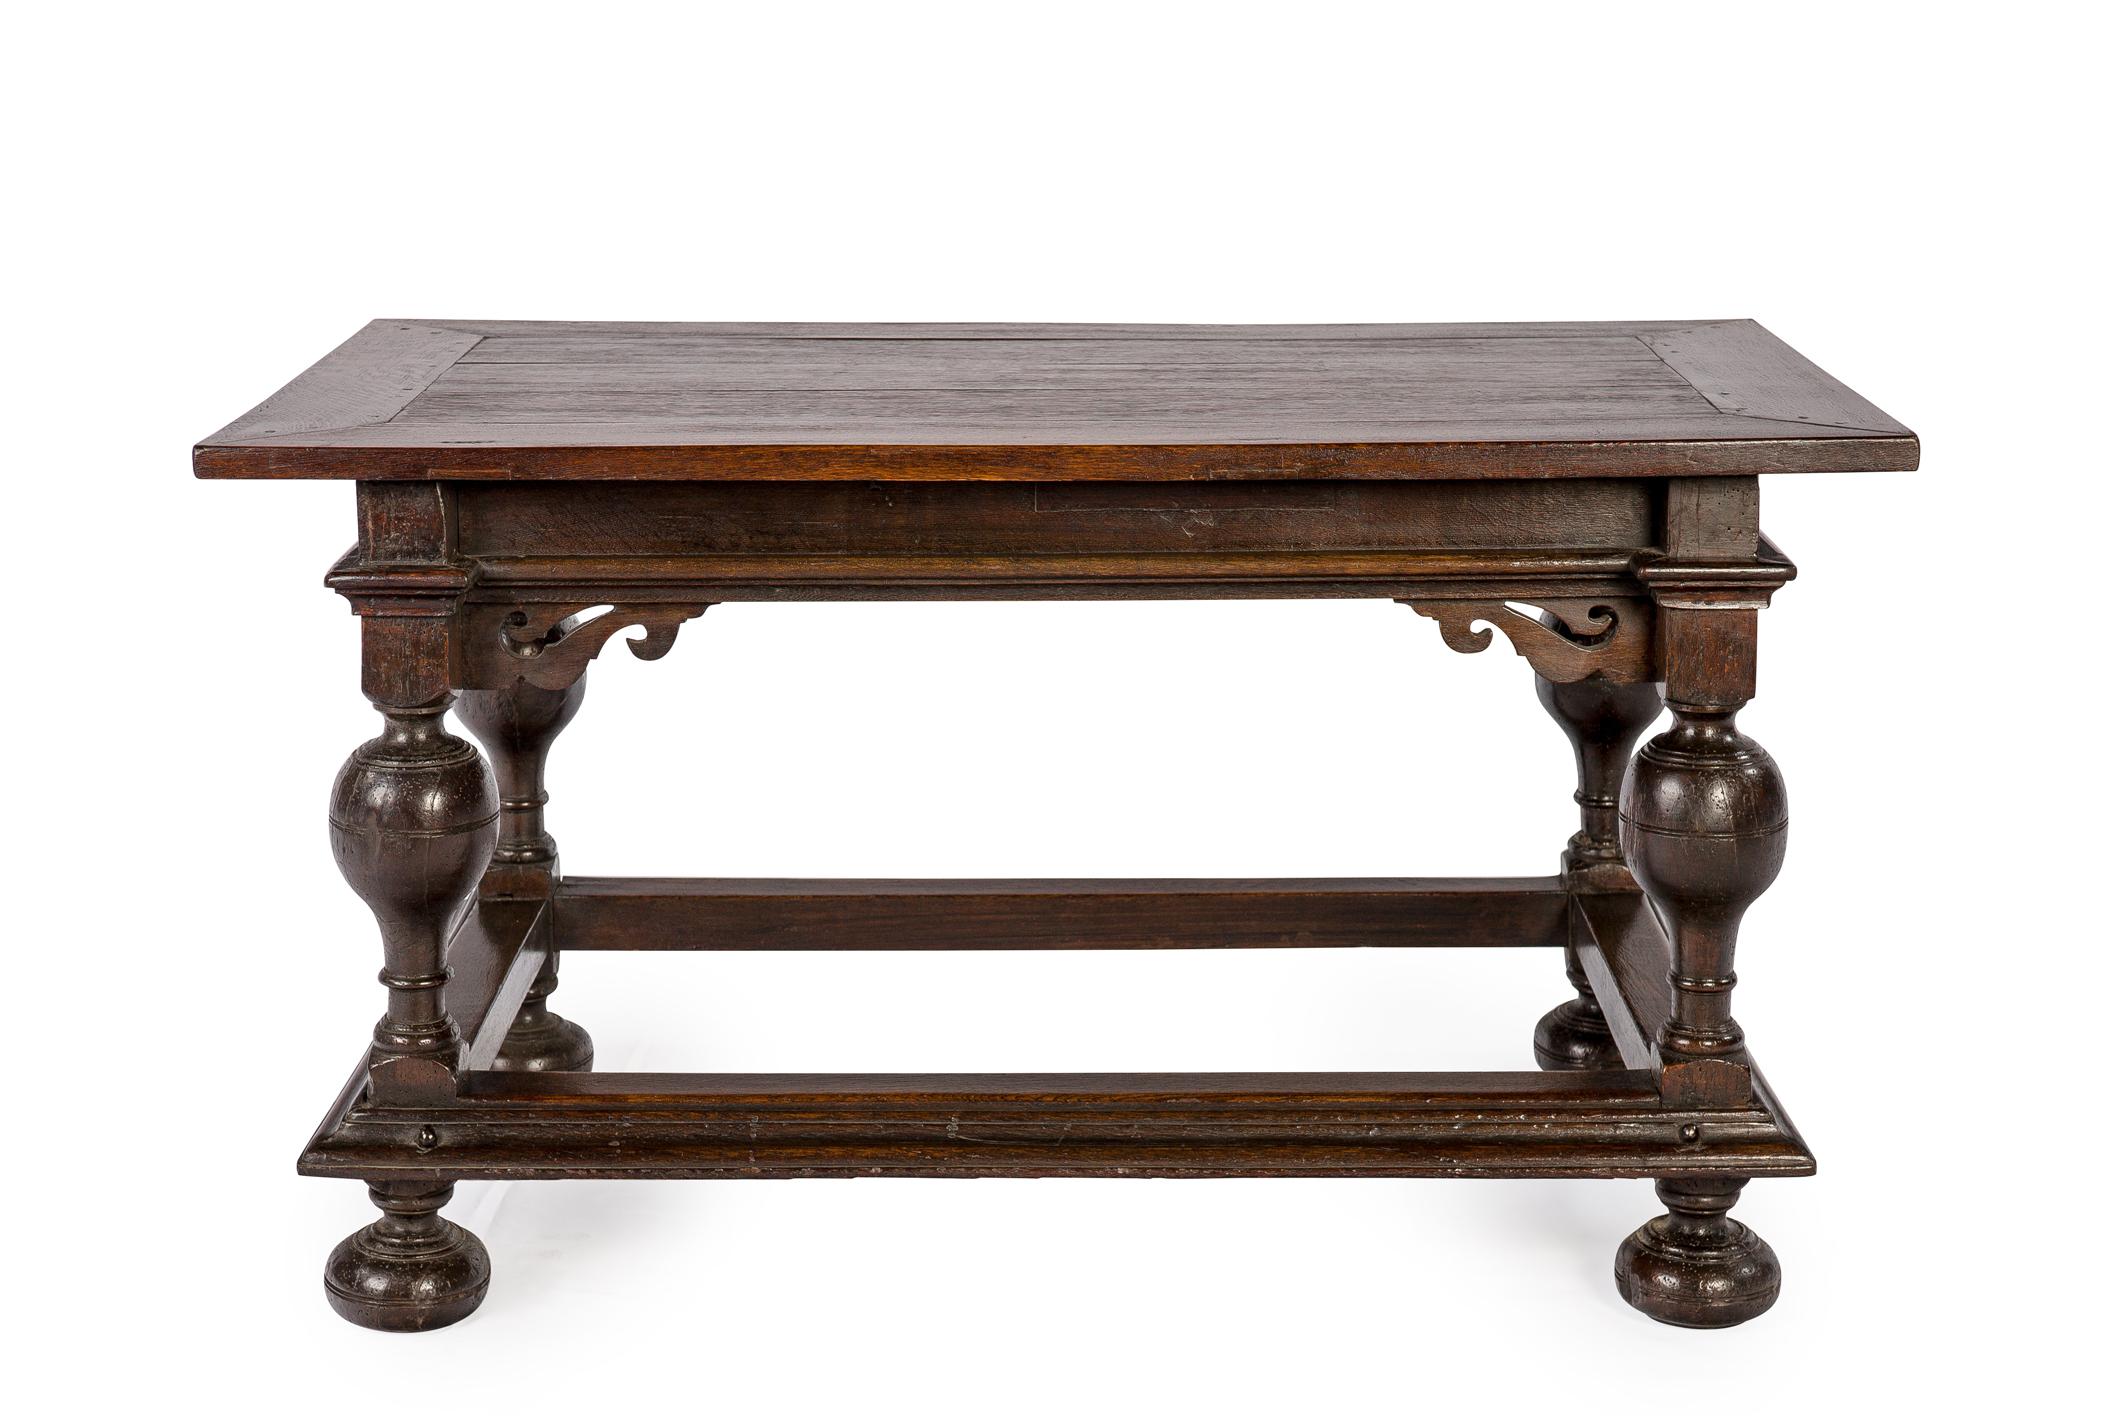 This beautiful renaissance table is made in the finest quality solid European summer oak in the Netherlands around 1680 It is a typical dutch renaissance table (so called bolpoottafel) with it’s turned legs and carved apron. The panelled tabletop